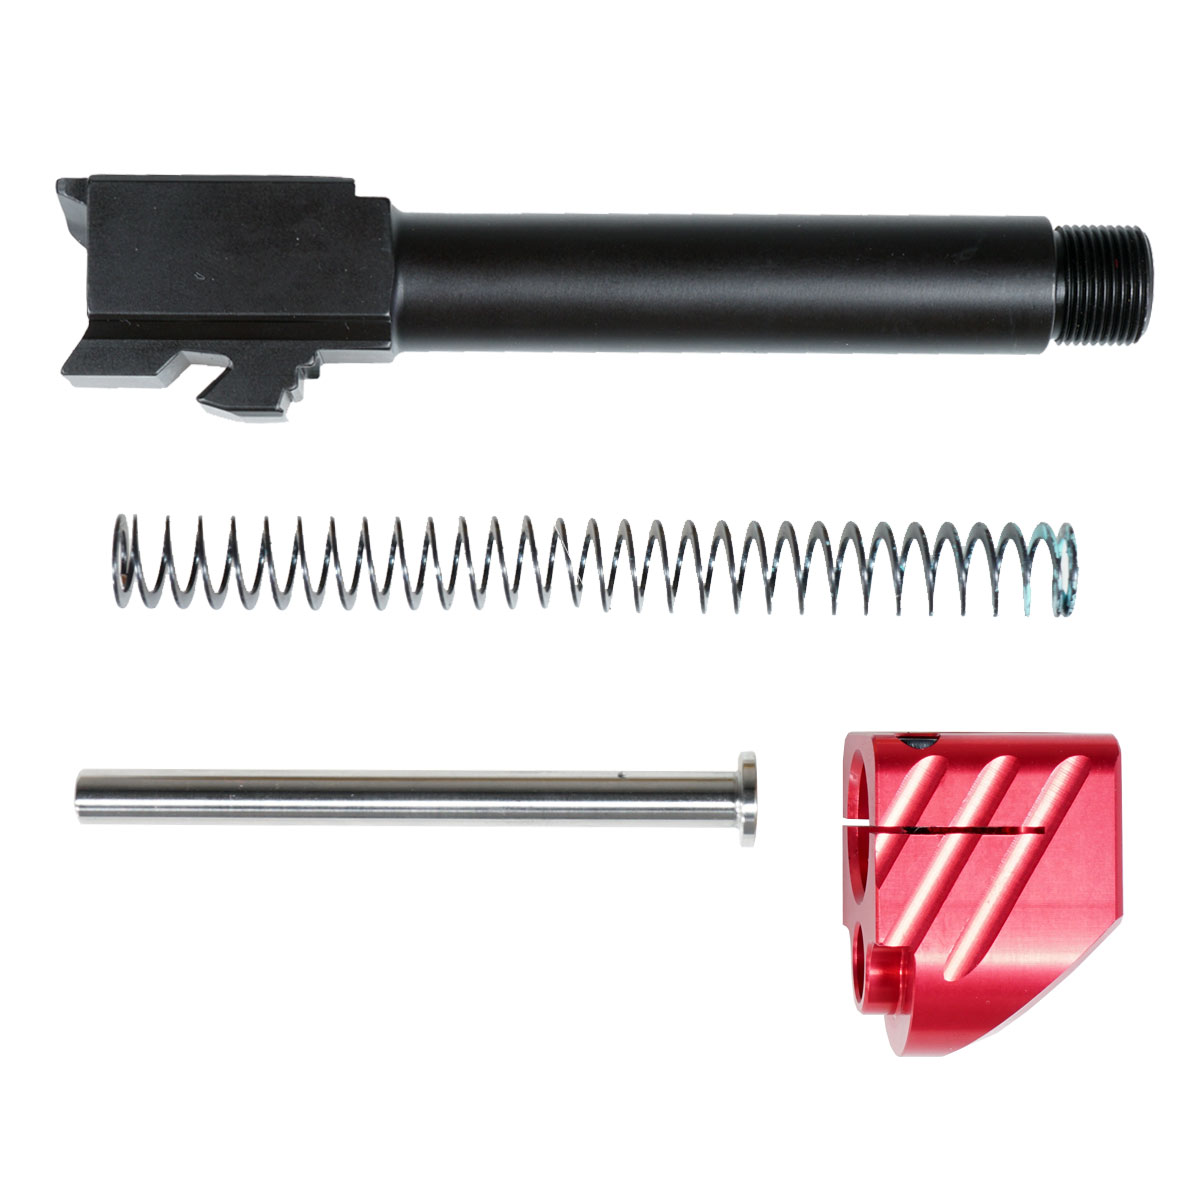 Upgrade Your Glock Kit: Mercury Precision Glock Compensator 6061 Aluminum, Anodized Type 2 Red Single port comp 1/2x28 with clamping set screws  + ELD Performance Match Grade 9mm Glock 19 Compatible Nitride Melonite 1-16T Threaded Barrel